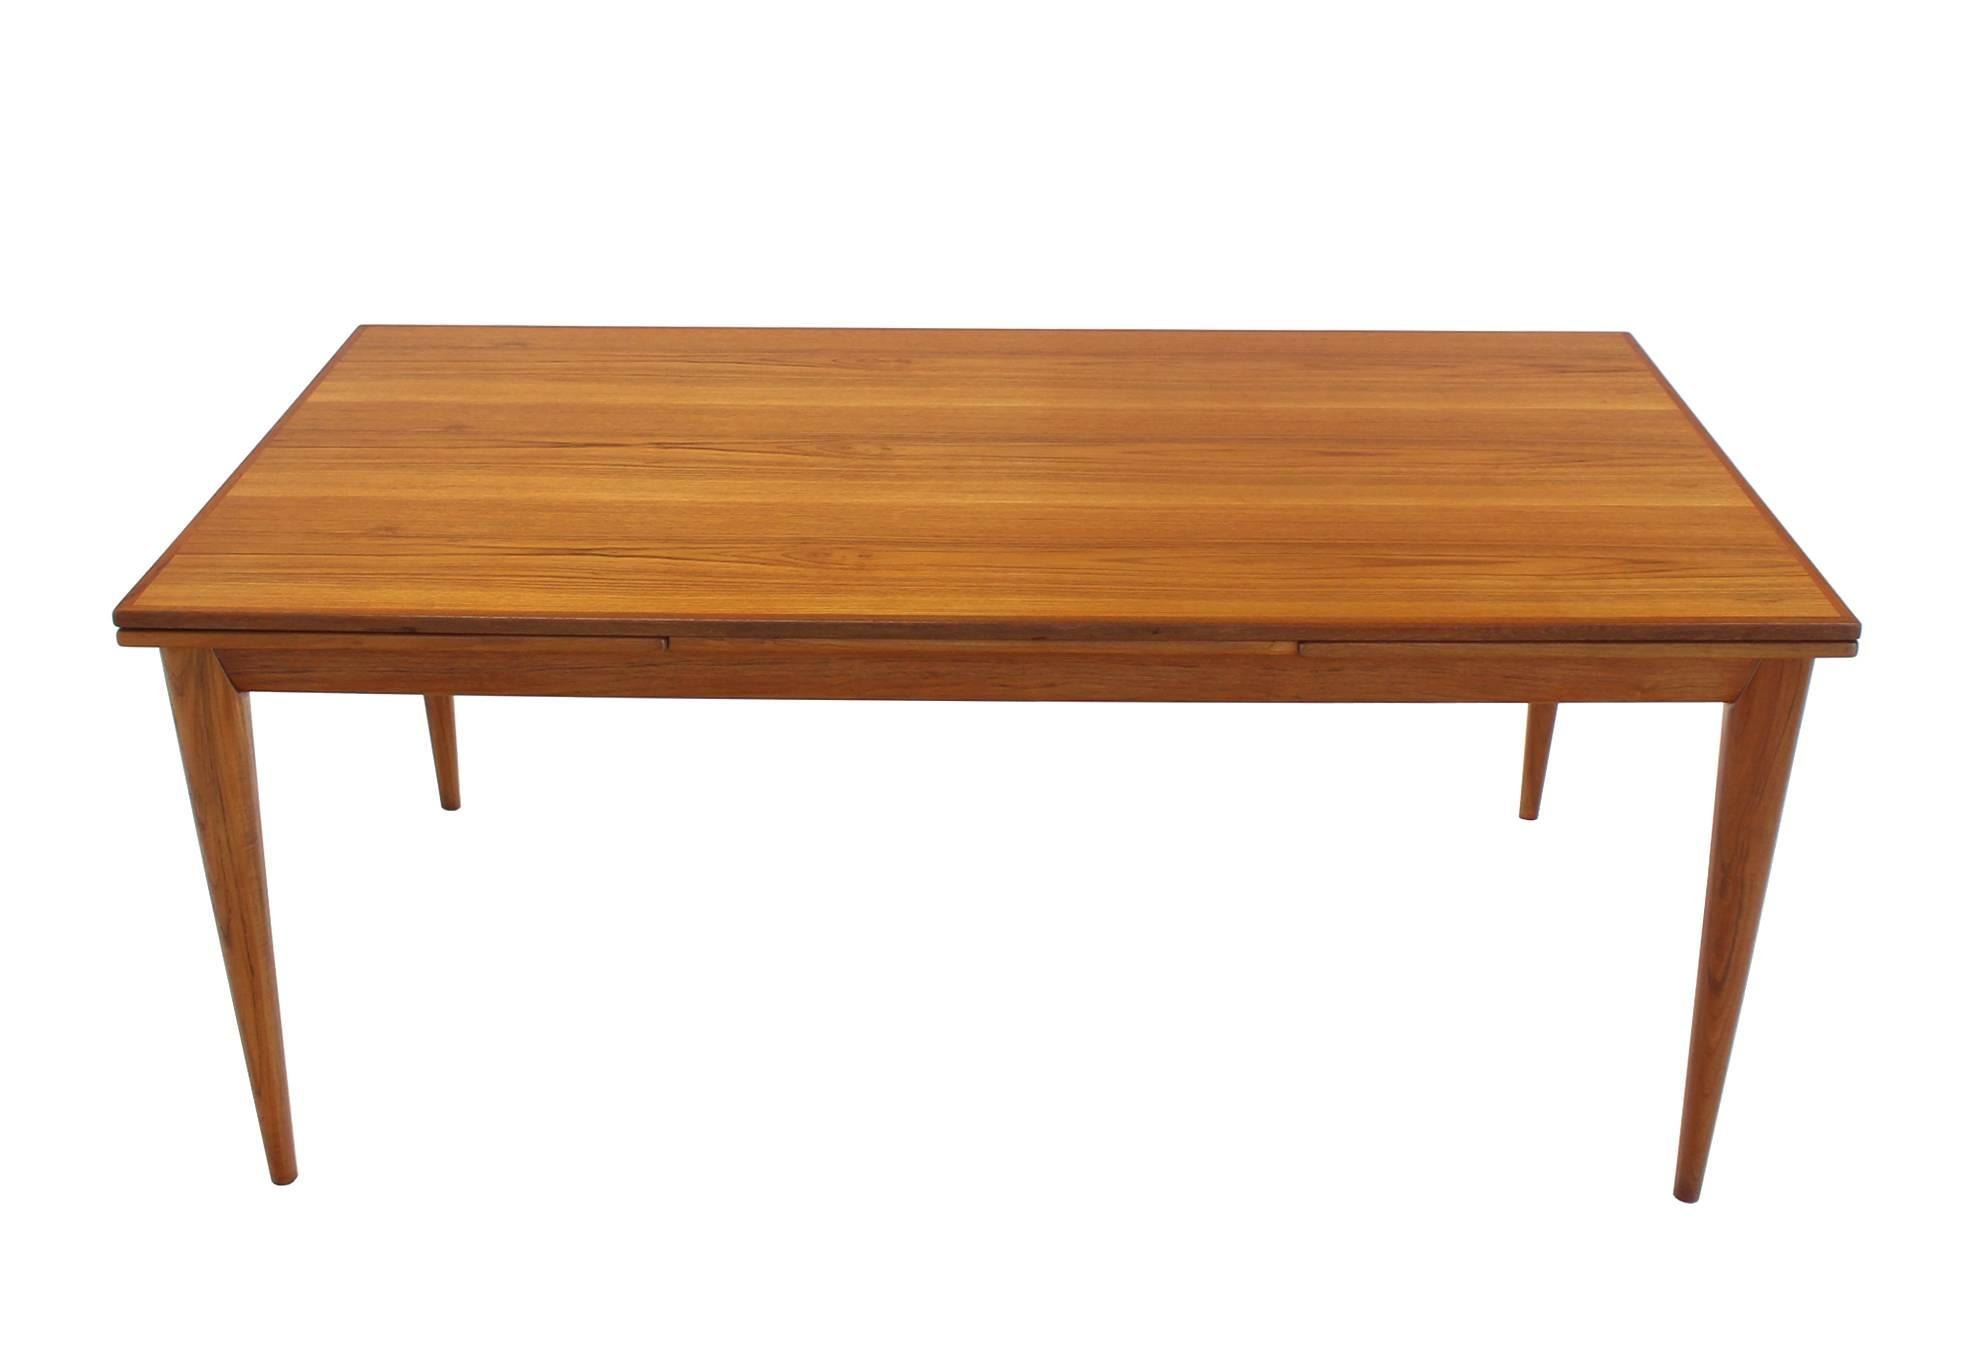 Very nicely solid built, mint condition, Danish Mid-Century Modern teak refectory table with 2 x 23